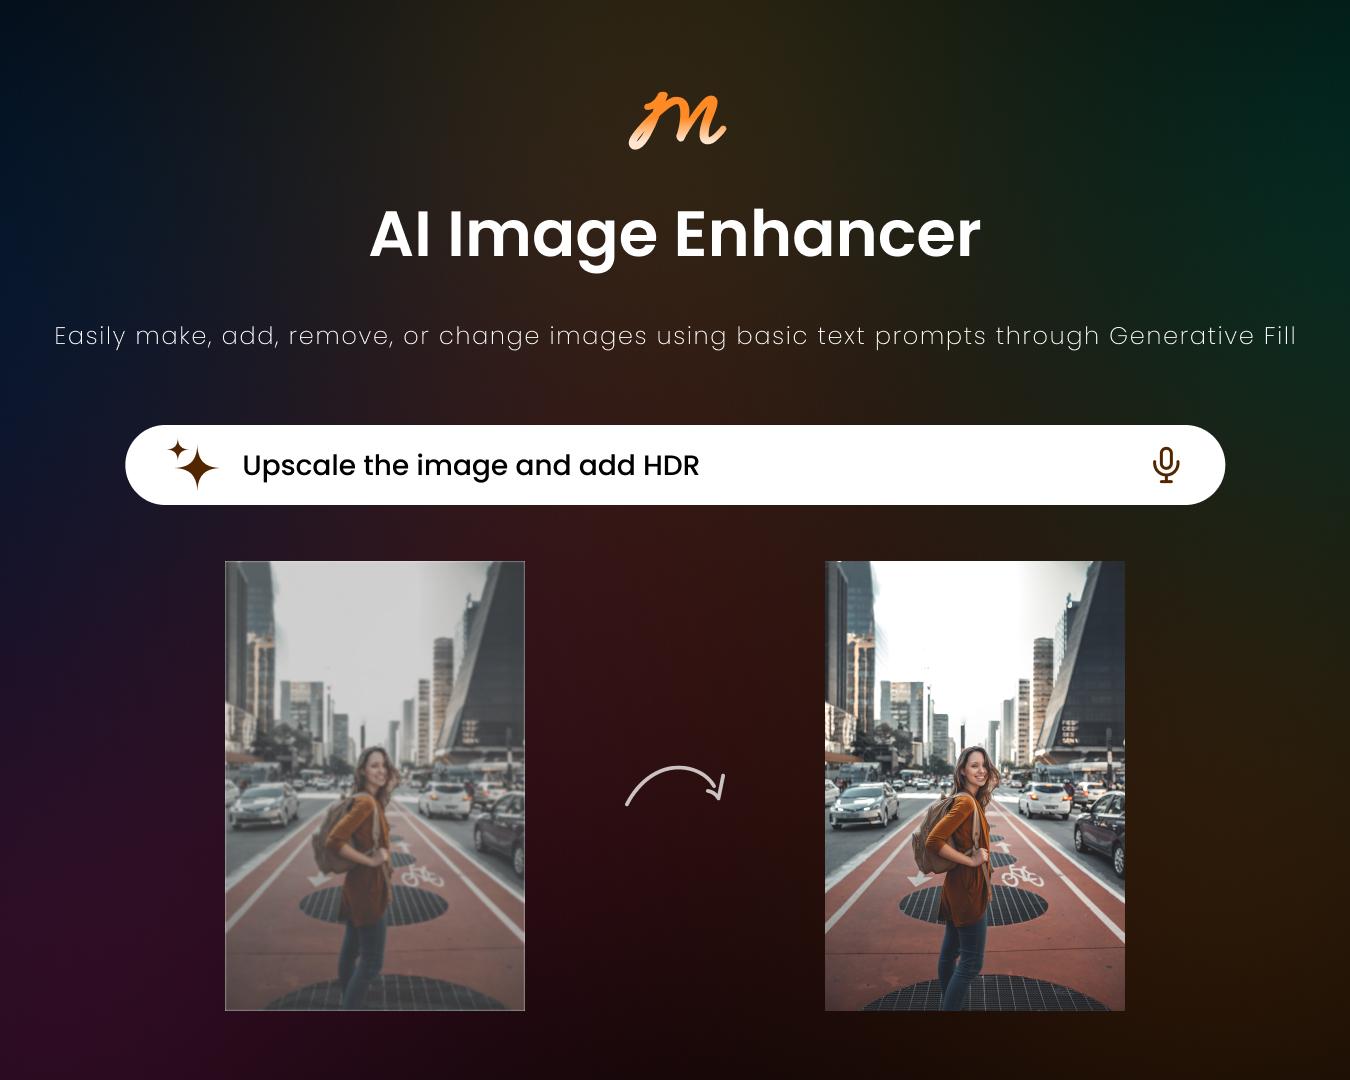 Elevate Your Images with AI Image Enhancer